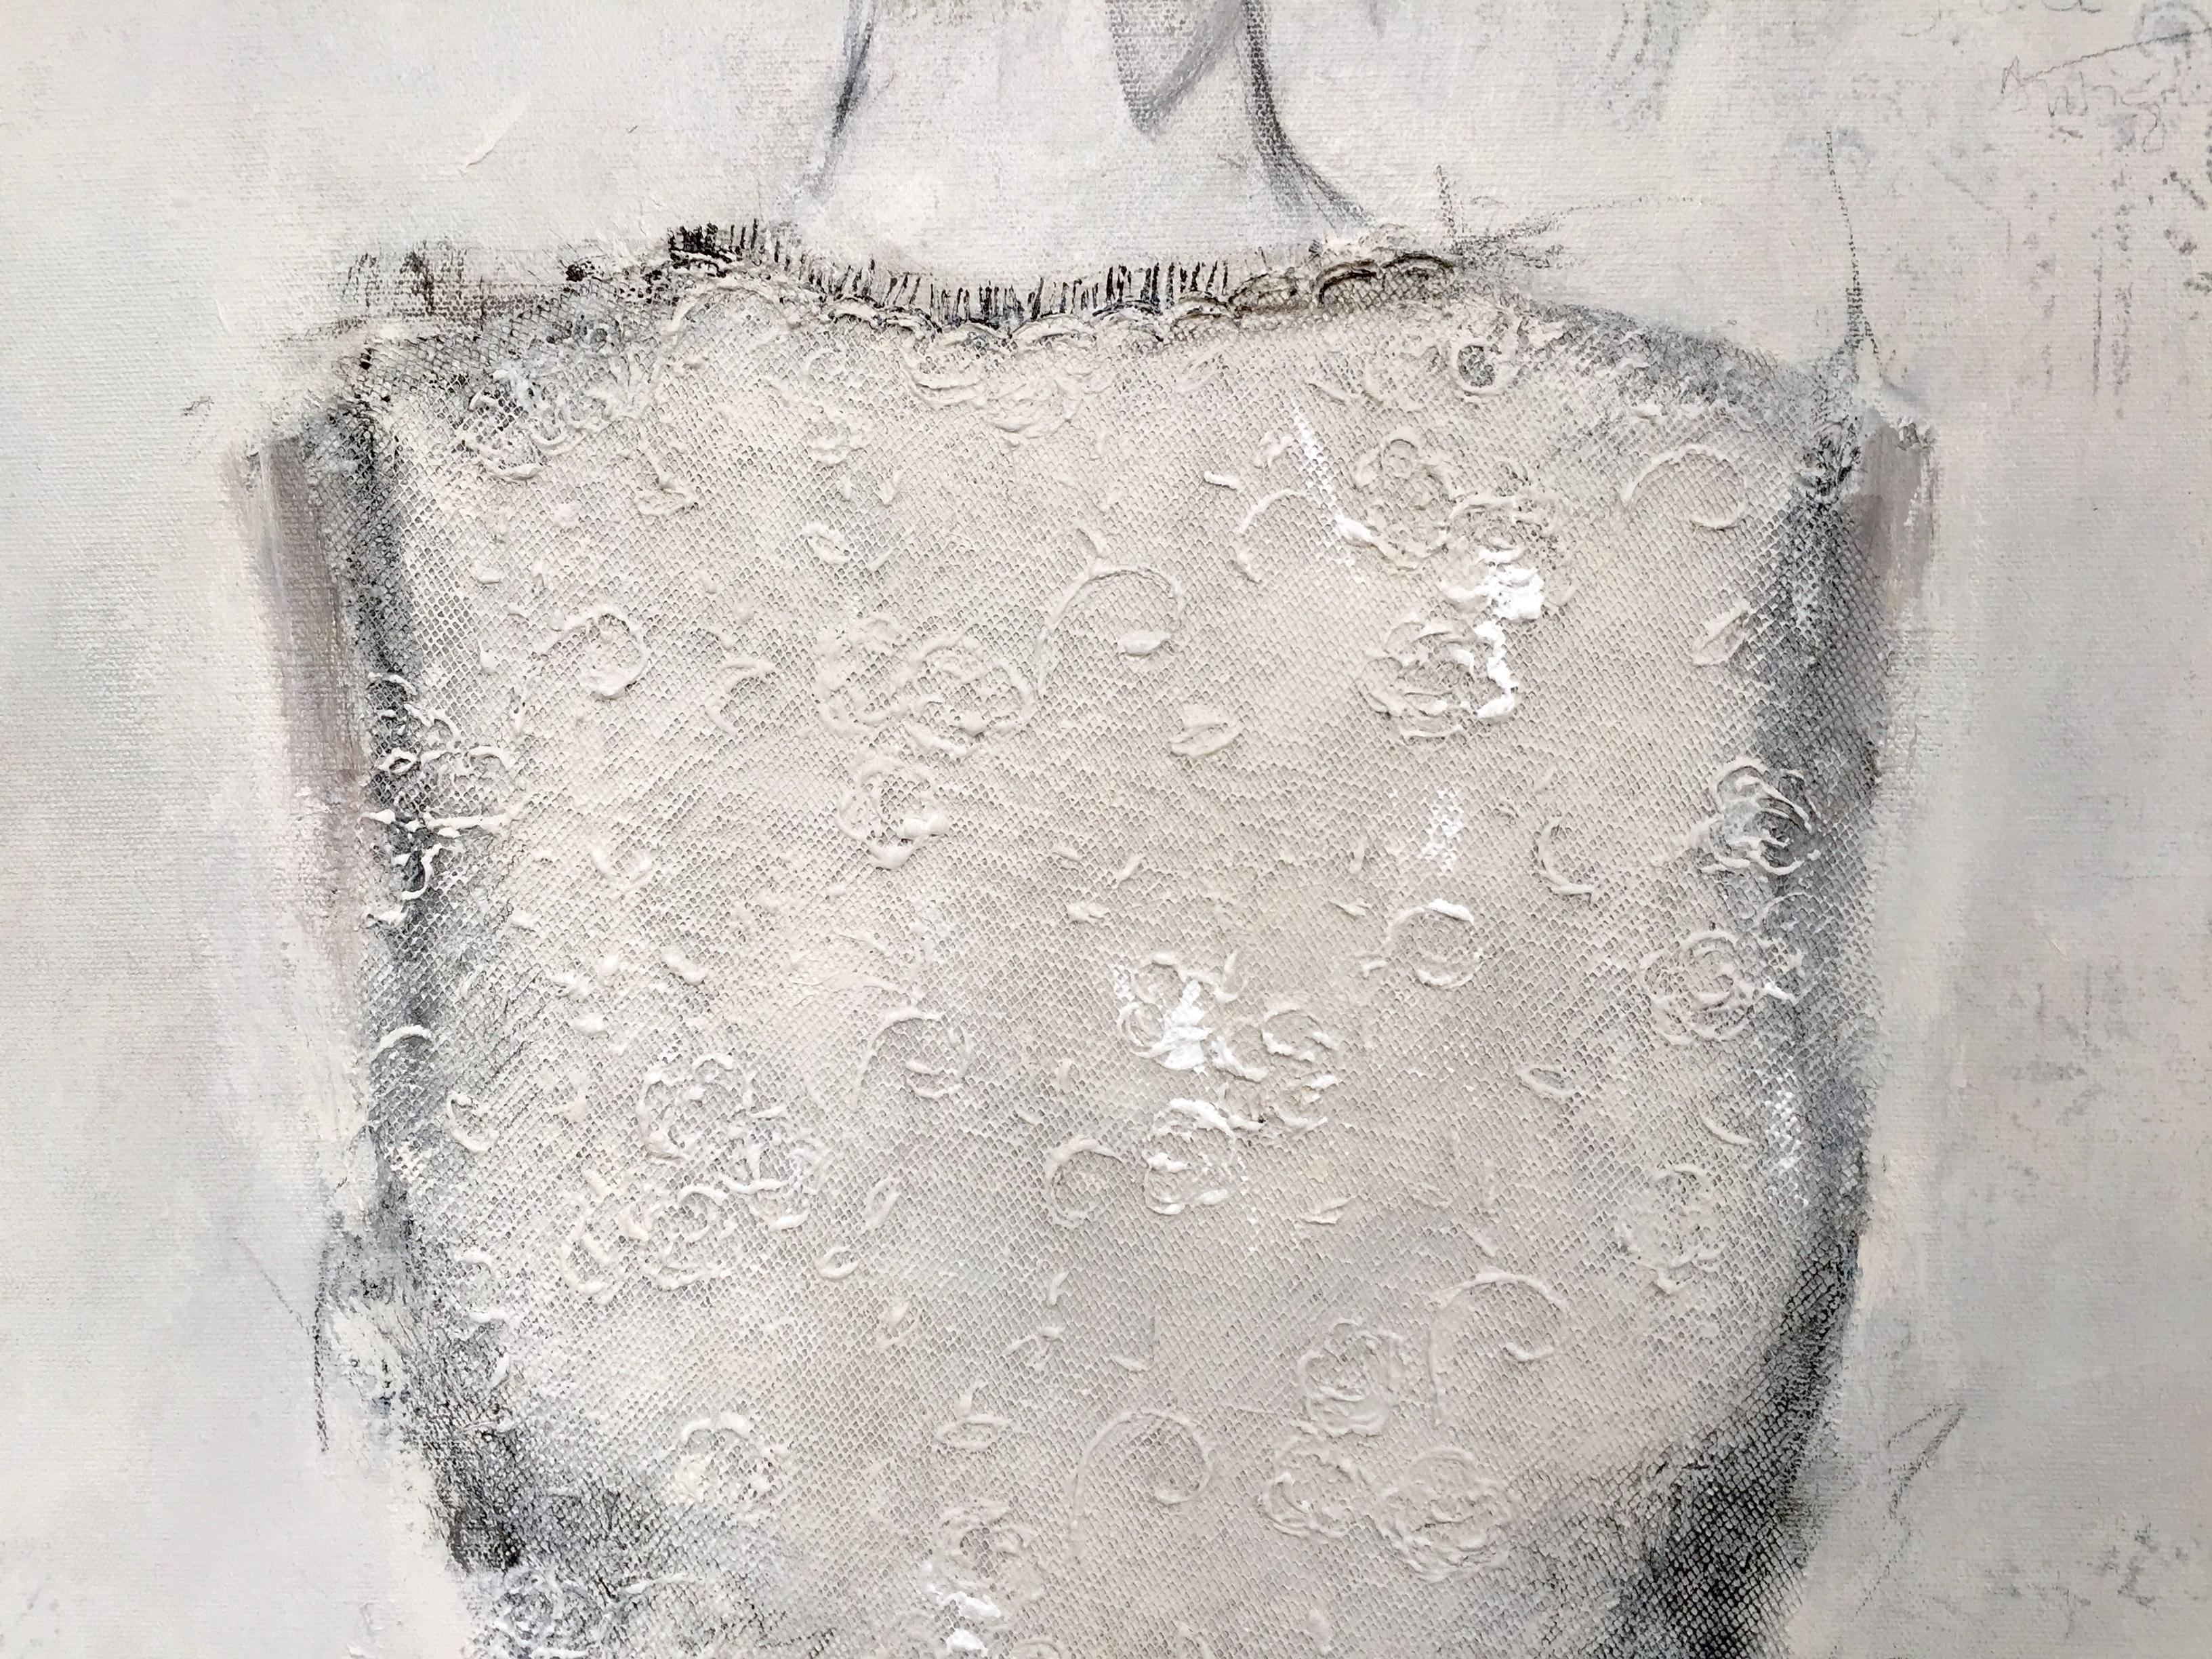 This dress painting features an interplay of paint and textile with an outcome both expressive and refined. Through the process of adding and subtracting, textures and tone on tone layering create depth and movement. The combination of delicate